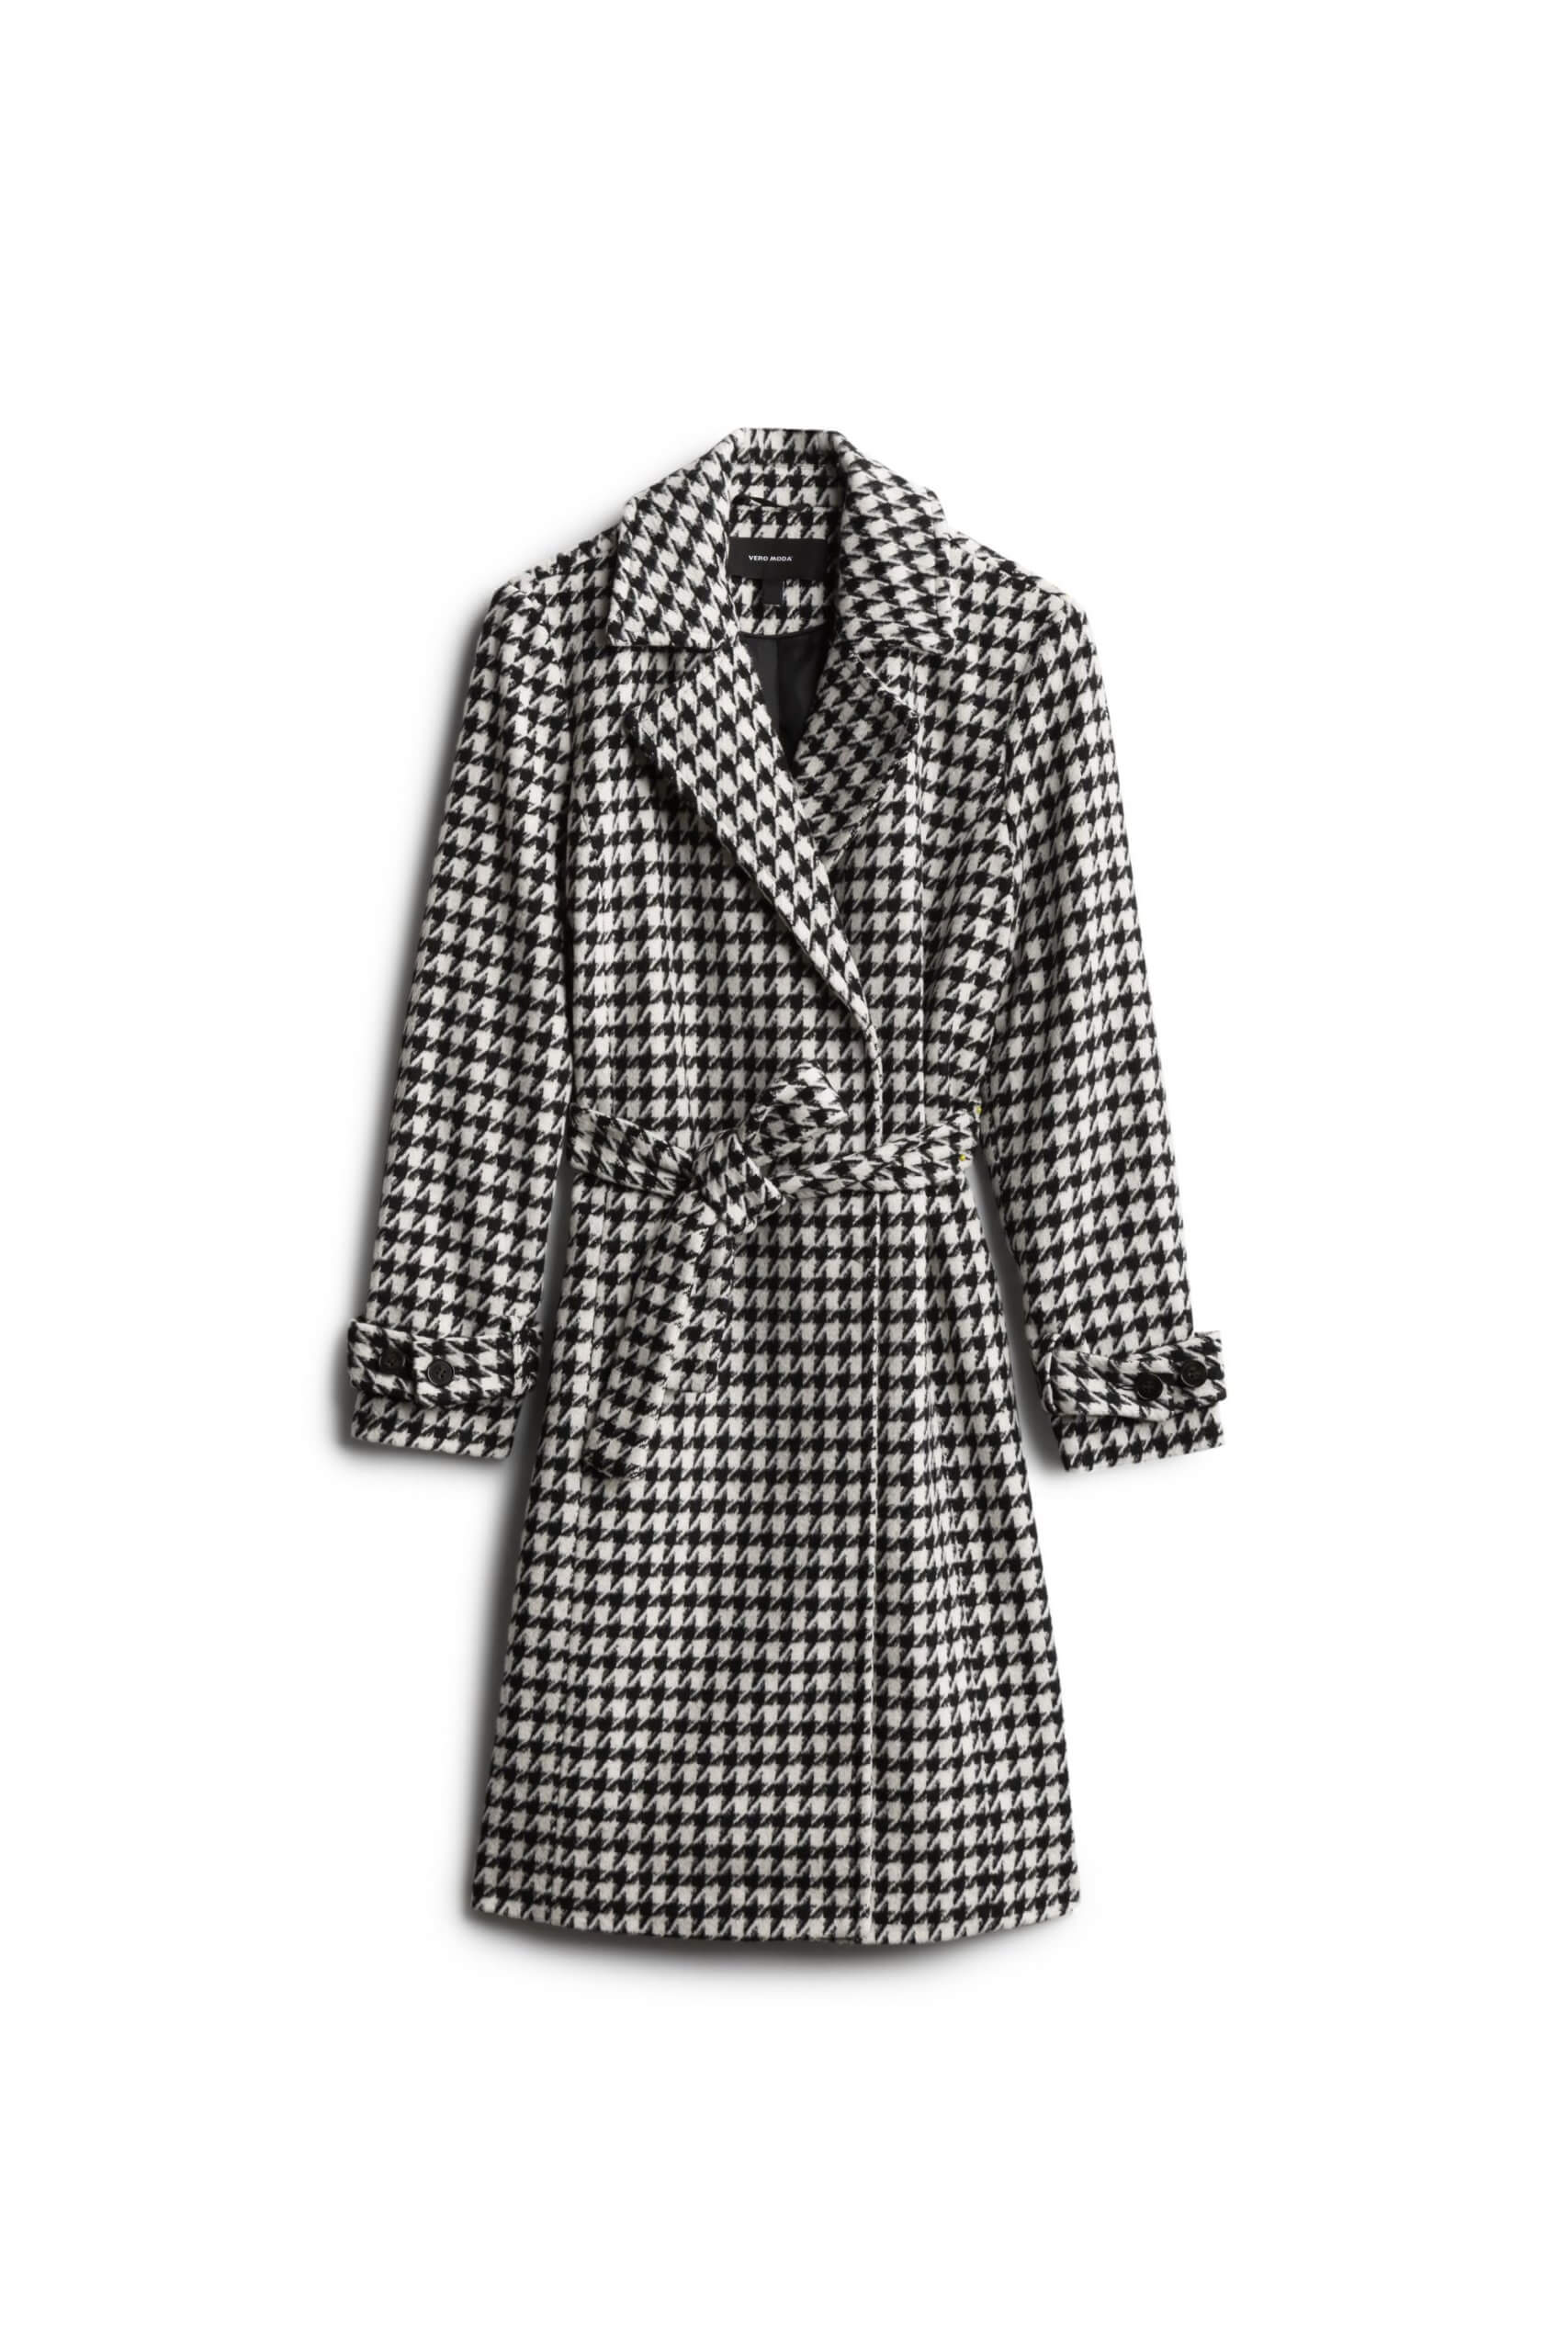 Stitch Fix Women’s black and white houndstooth trench coat.